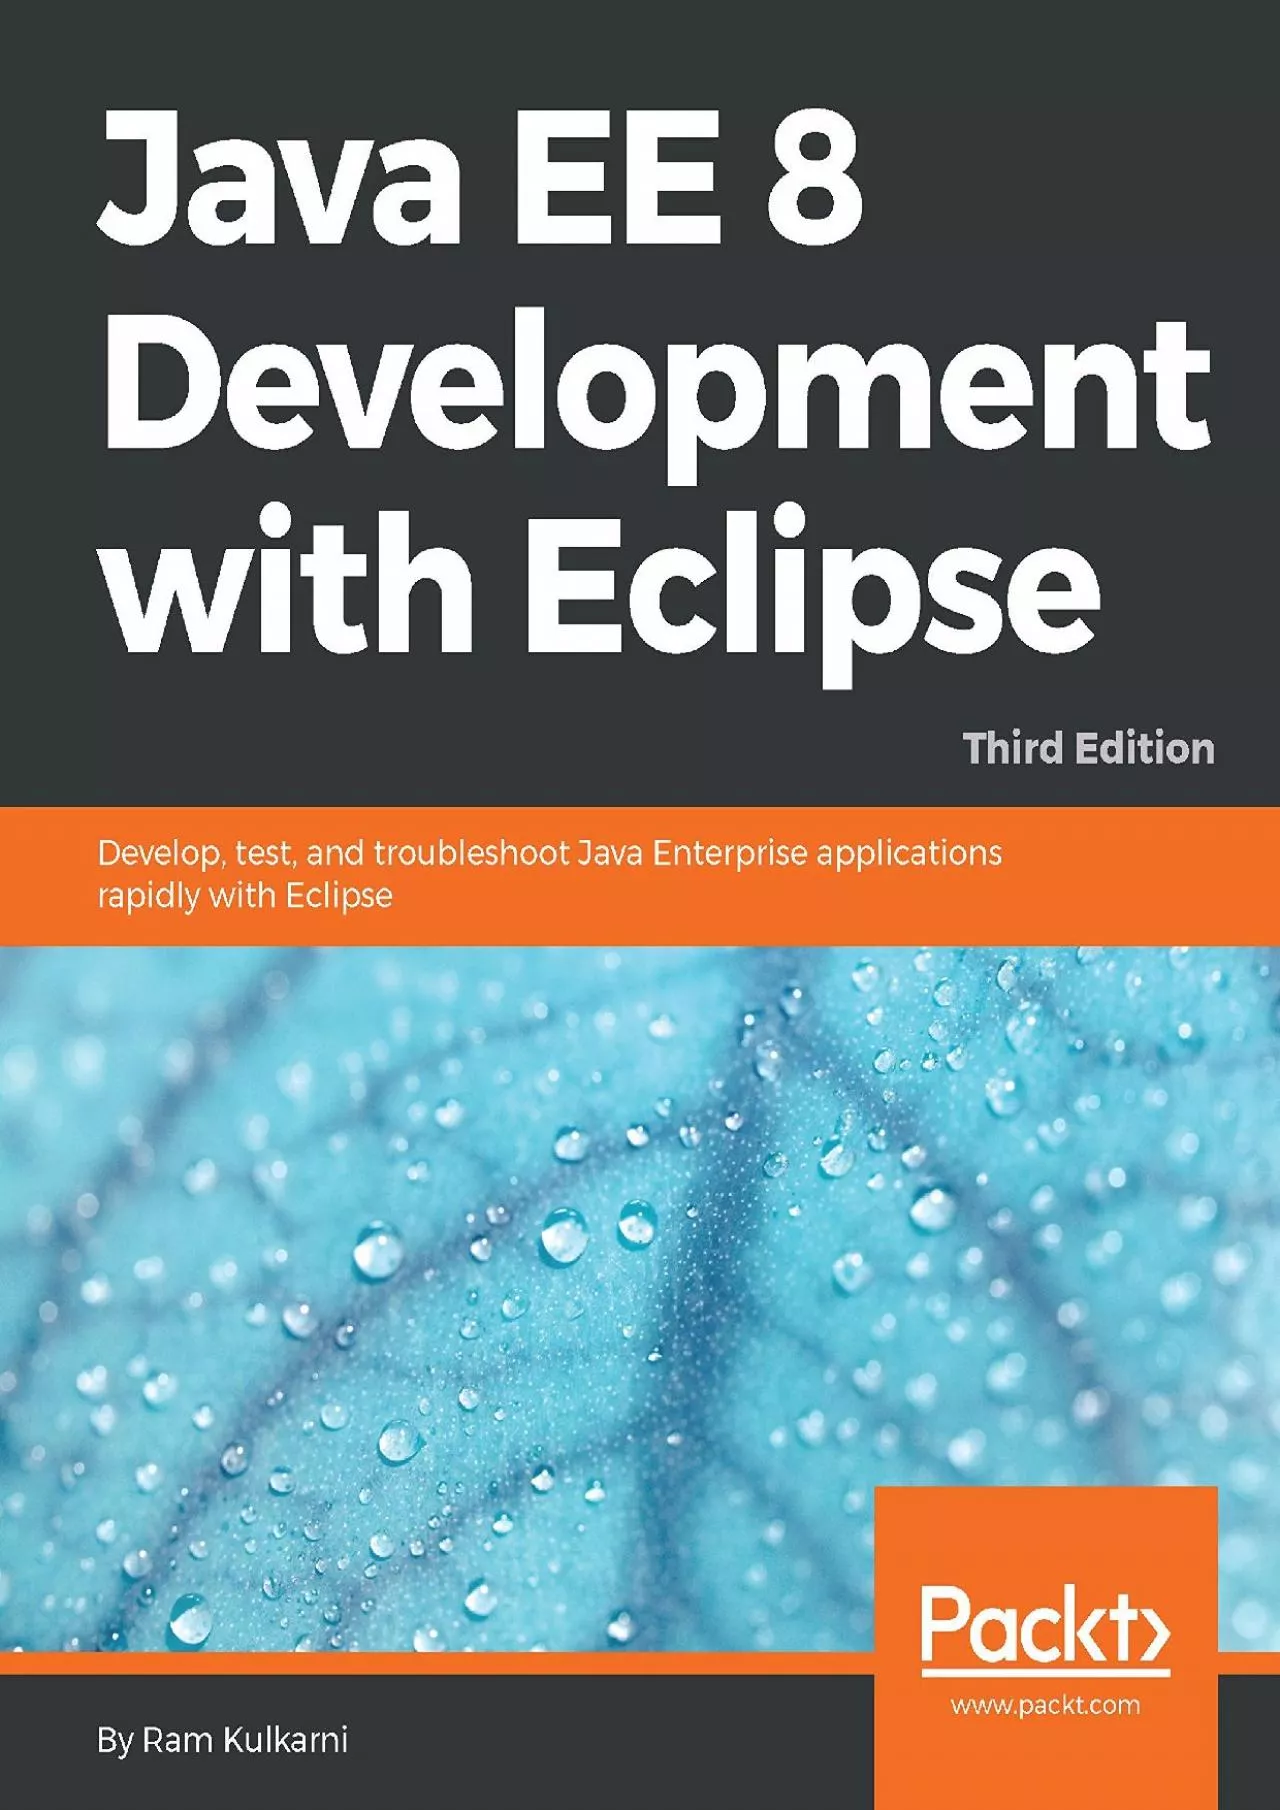 [FREE]-Java EE 8 Development with Eclipse: Develop, test, and troubleshoot Java Enterprise